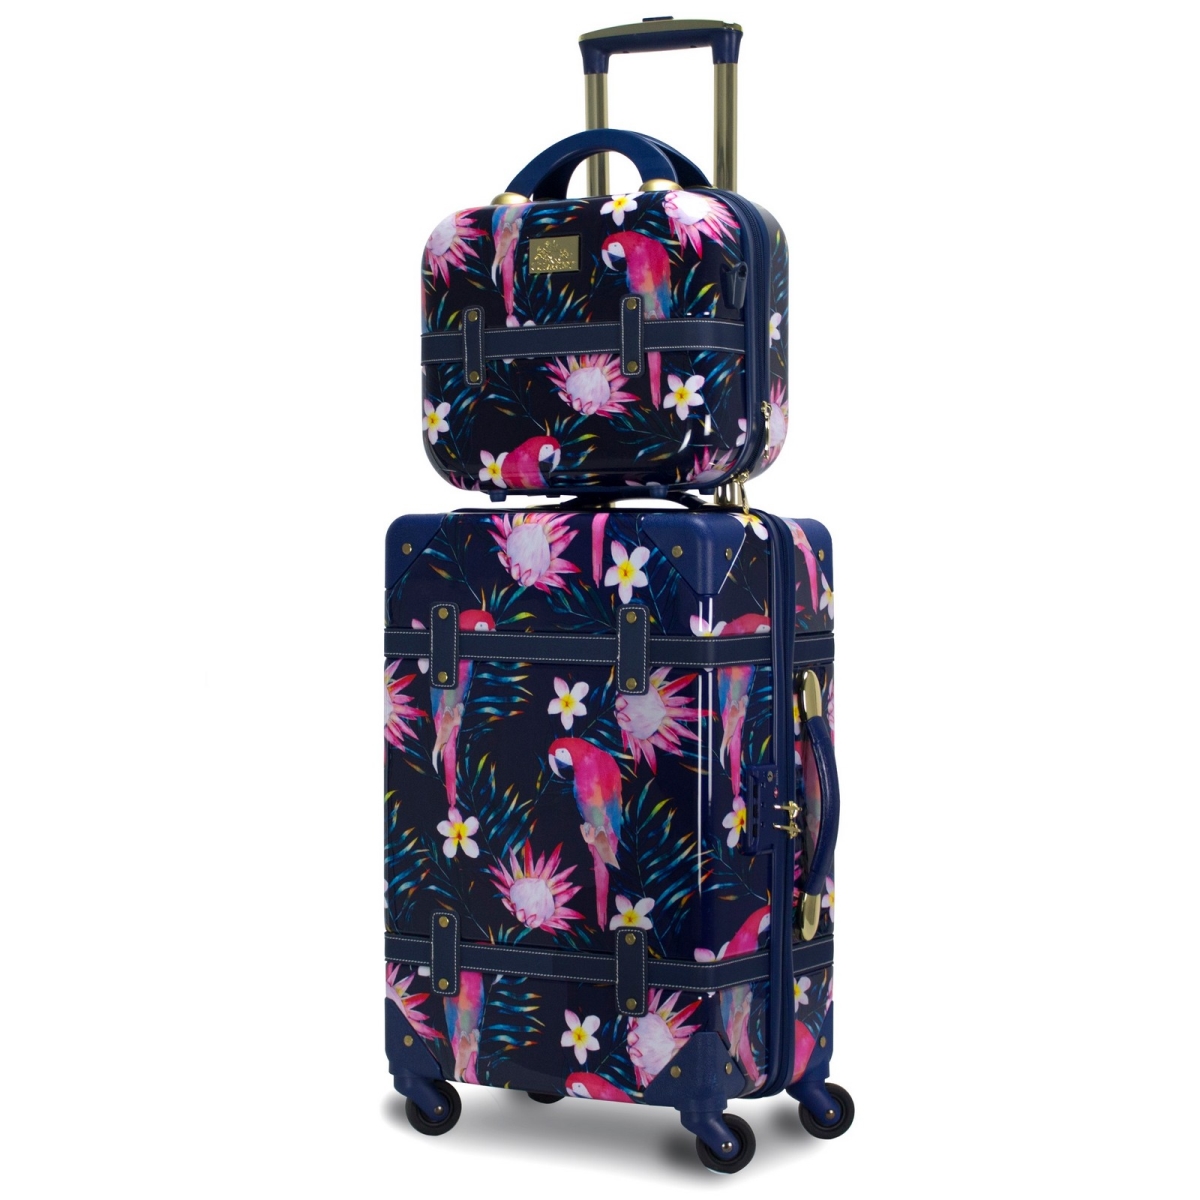 Picture of Chariot CH-505-2-PC-PARROT Chariot Gatsby 2-Piece Hardside Carry-On Spinner Luggage Set - Parrot